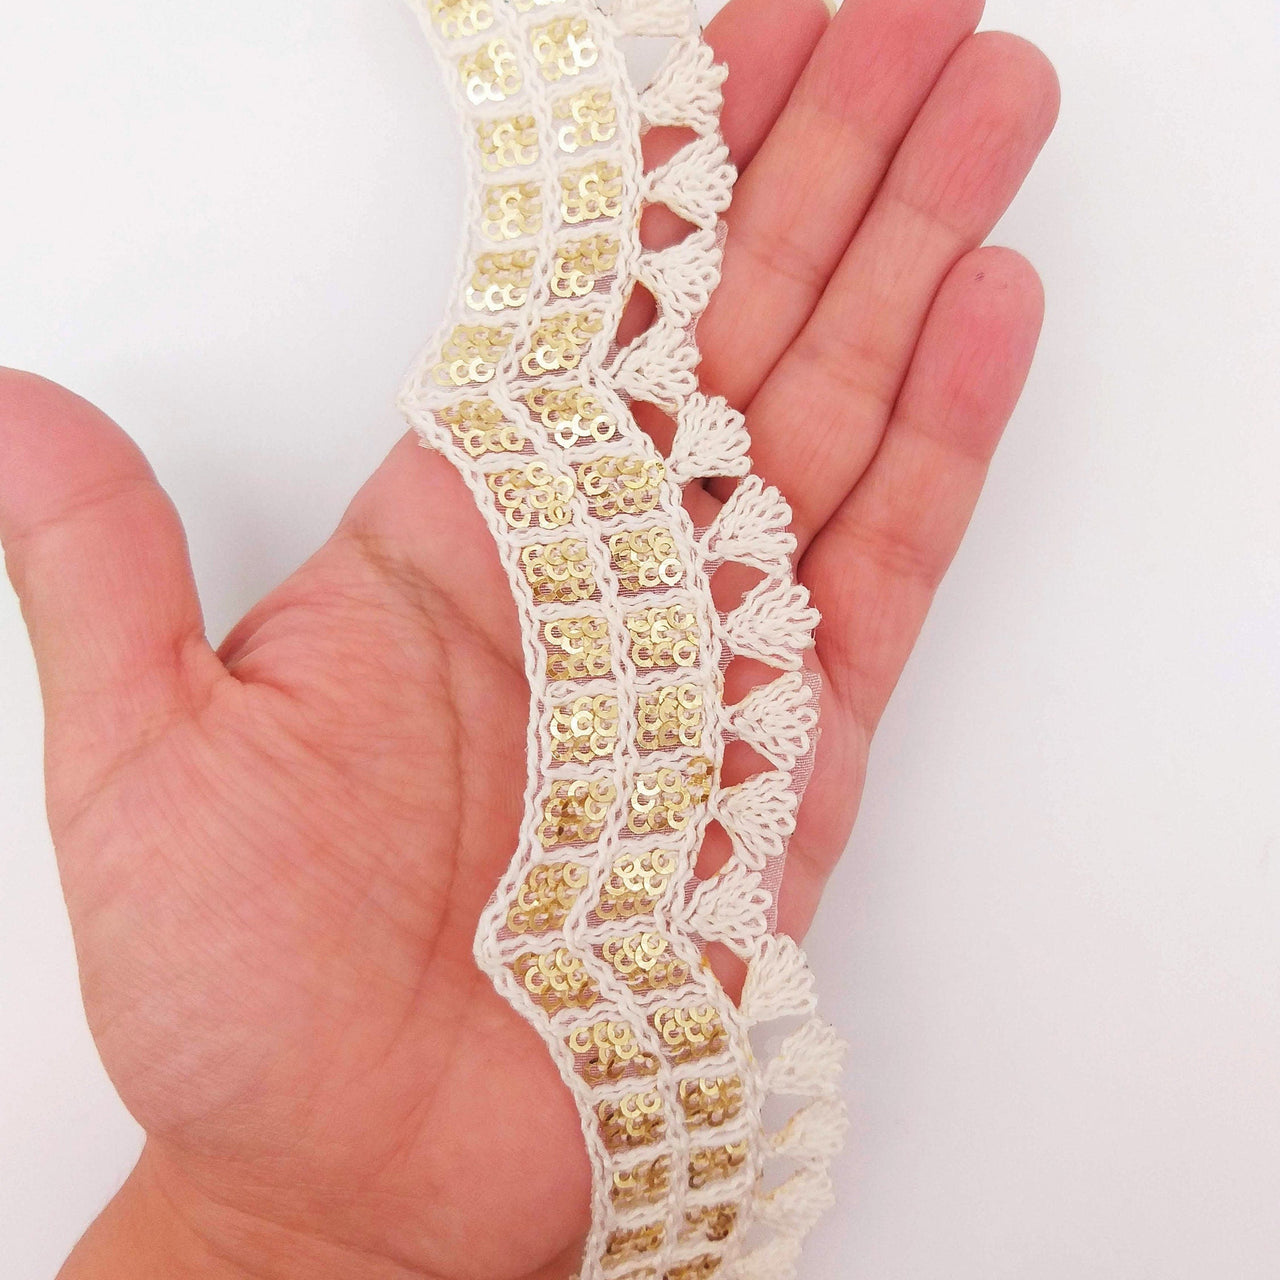 Nine Yards Off White Scallop Lace Trim Embroidered with Gold Sequins, Cutwork Trim, Scallops Wedding Trim